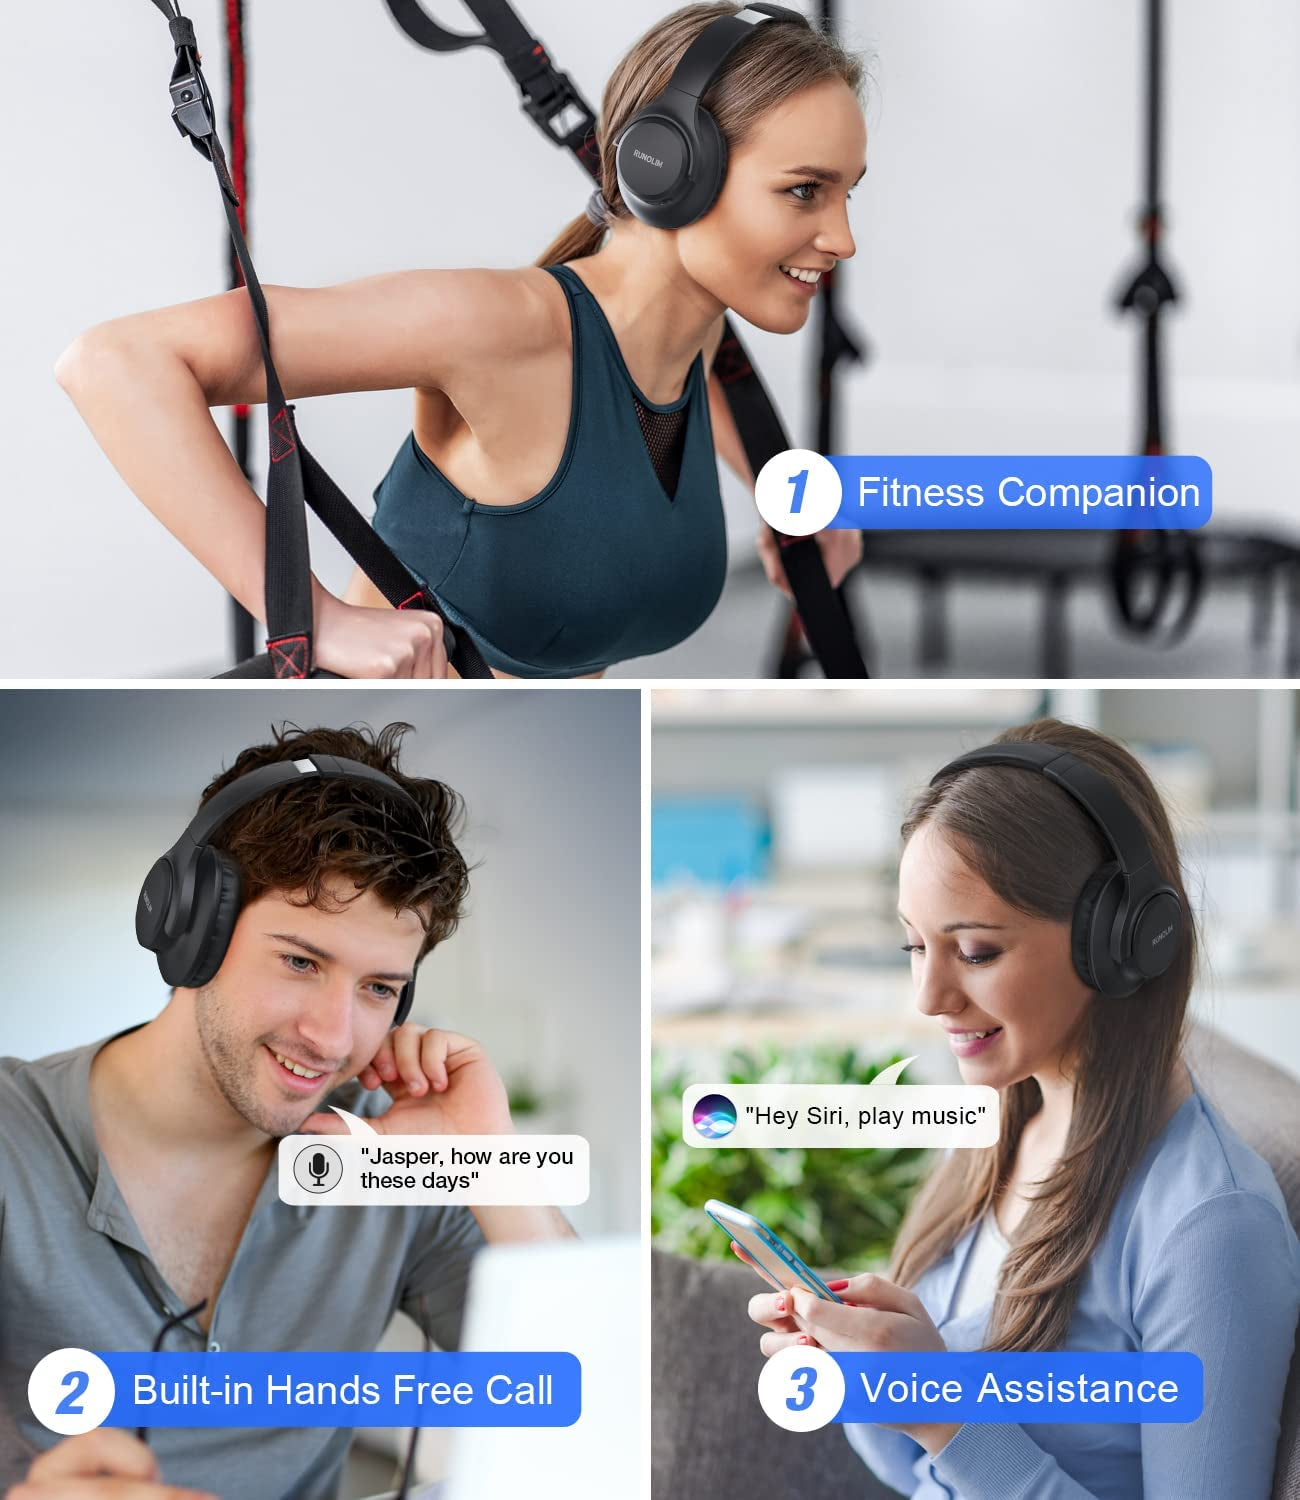 Over Ear Bluetooth Headphones, 60Hrs Headphones Wireless Bluetooth with Microphone, Hifi Stereo with Deep Bass, Foldable Lightweight Headset for PC Phone Laptop, Memorable Foam Cover